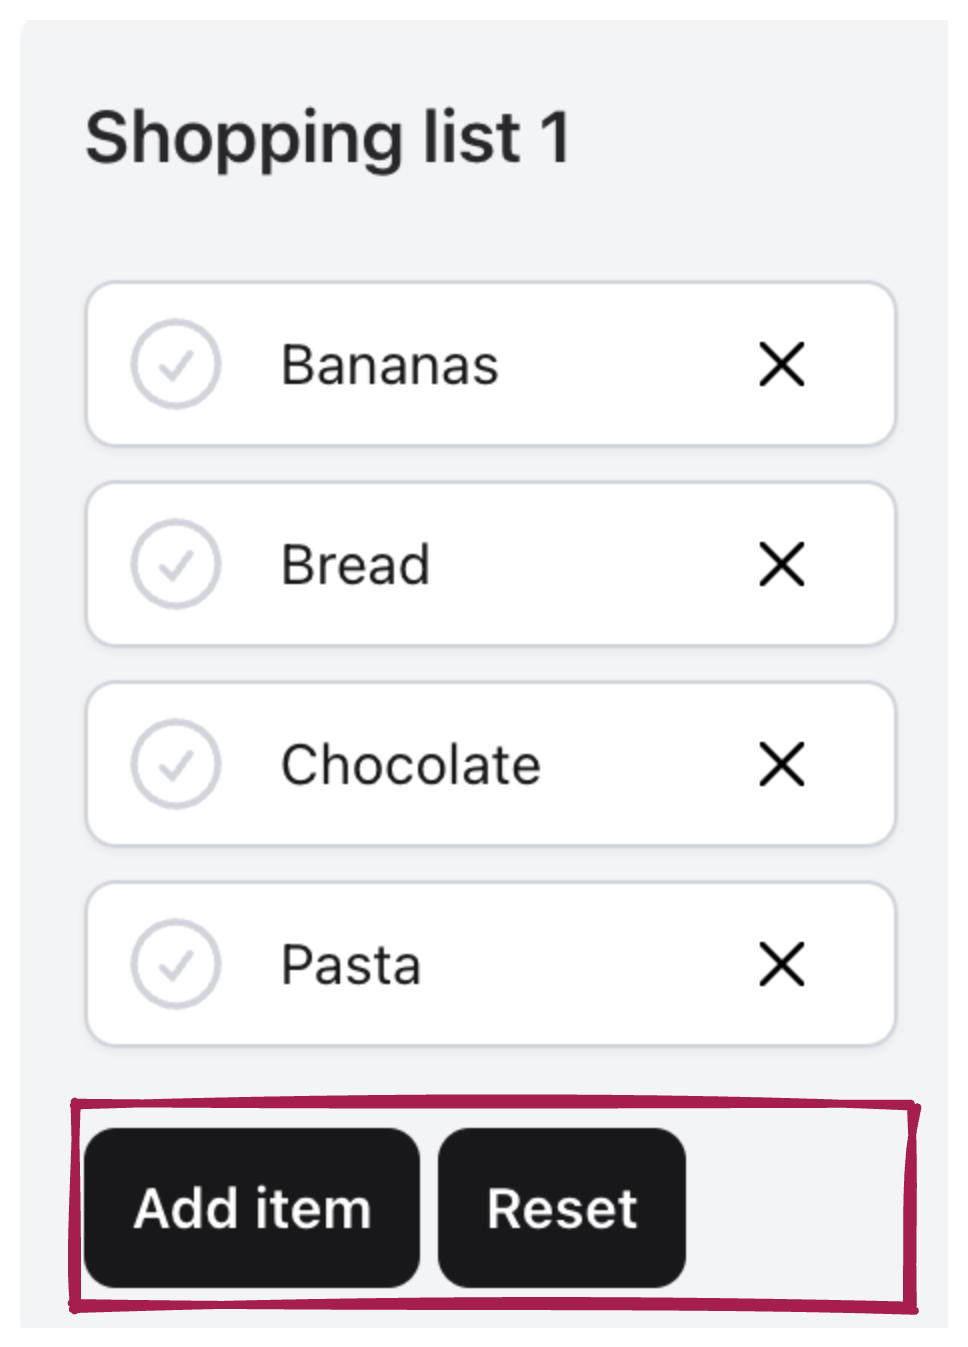 This is a screenshot of the shopping list component. Below the list items, there is a highlighted section containing two buttons. The first button is used to add a new item form to the list, while the second button is used to reset the list items.